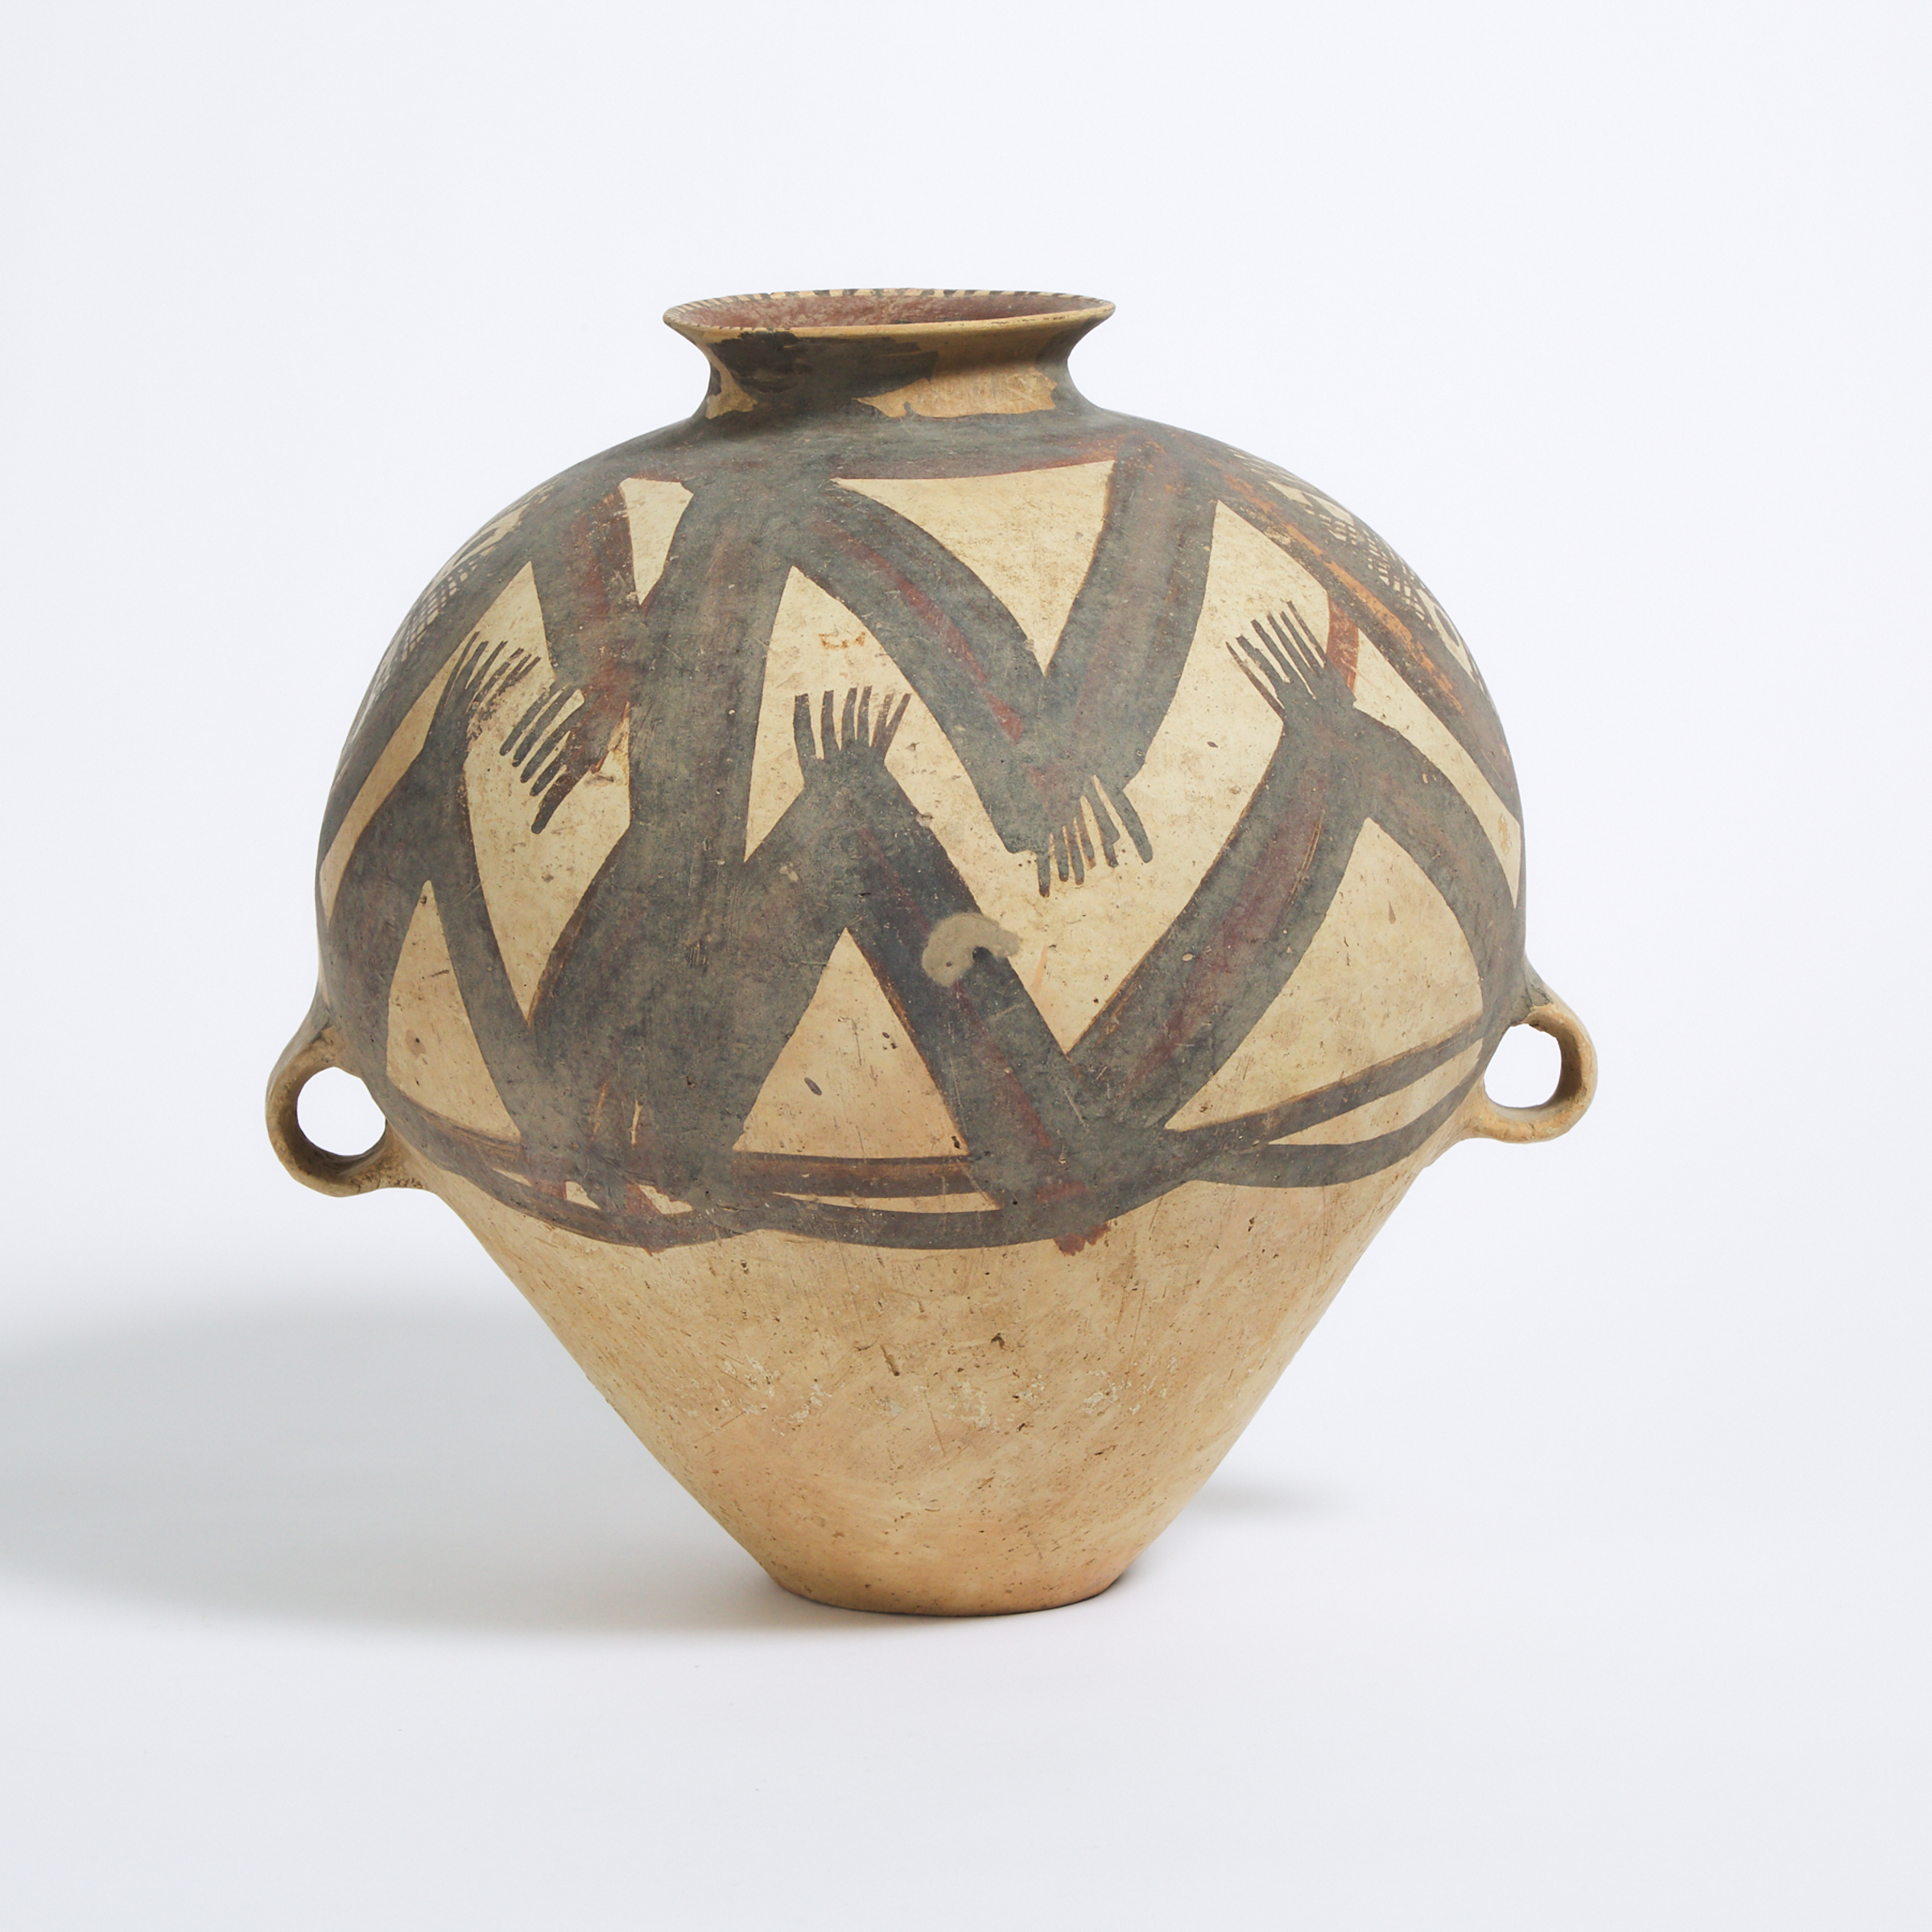 A Large Painted Pottery Jar, Majiayao Culture, Machang Phase, Neolithic Period, 3rd Millennium BC